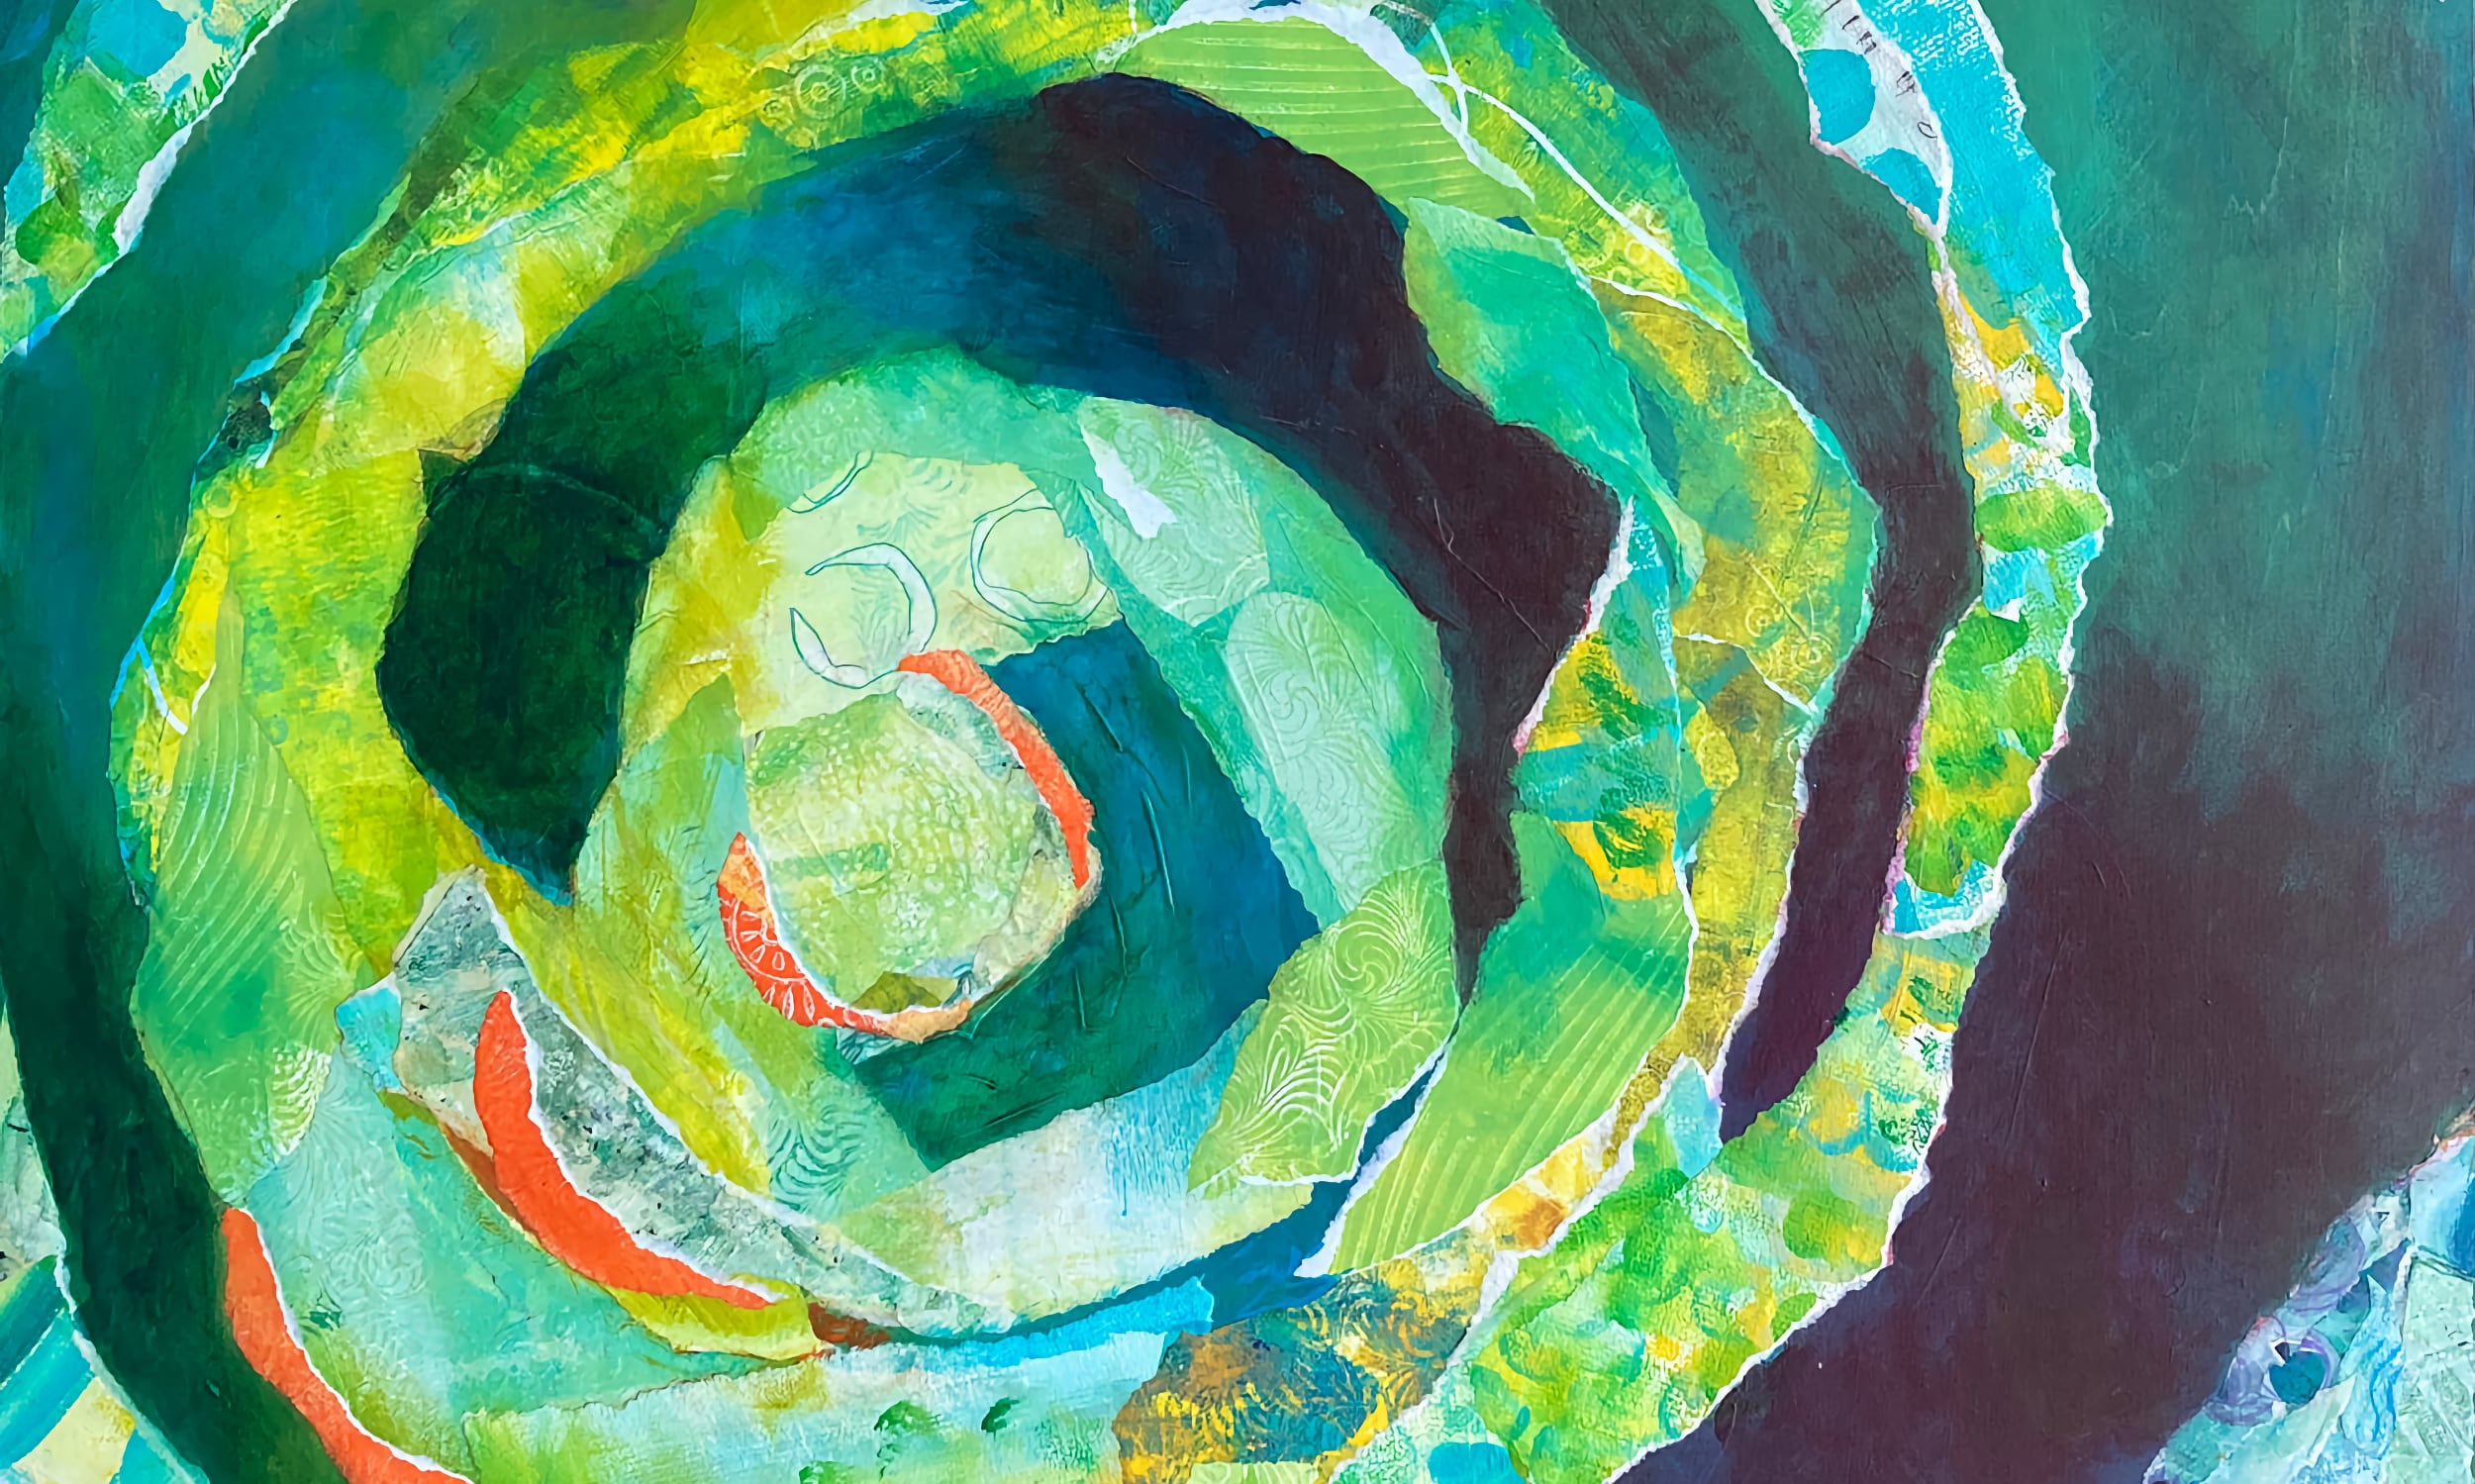 Artwork by Mary K. Shaw called Widening Circles